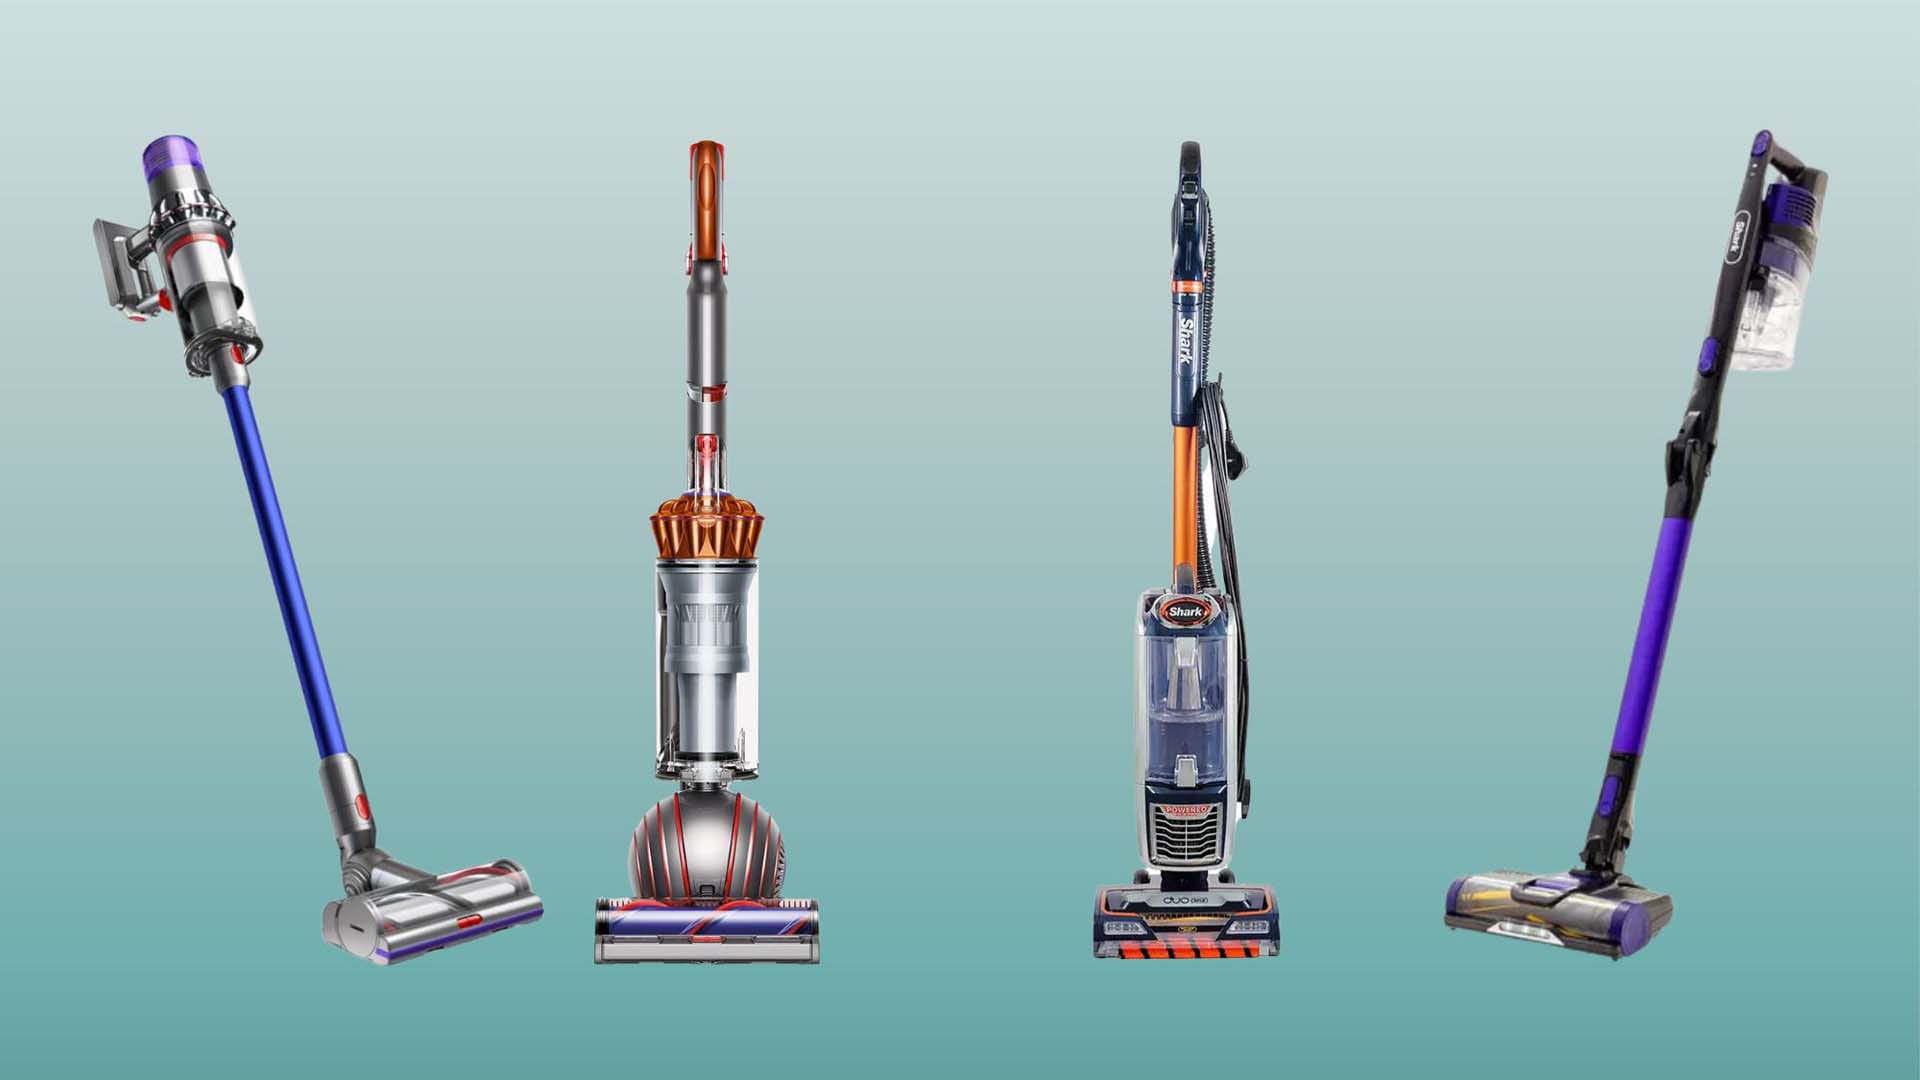 Range of Dyson and Shark vacuum cleaners